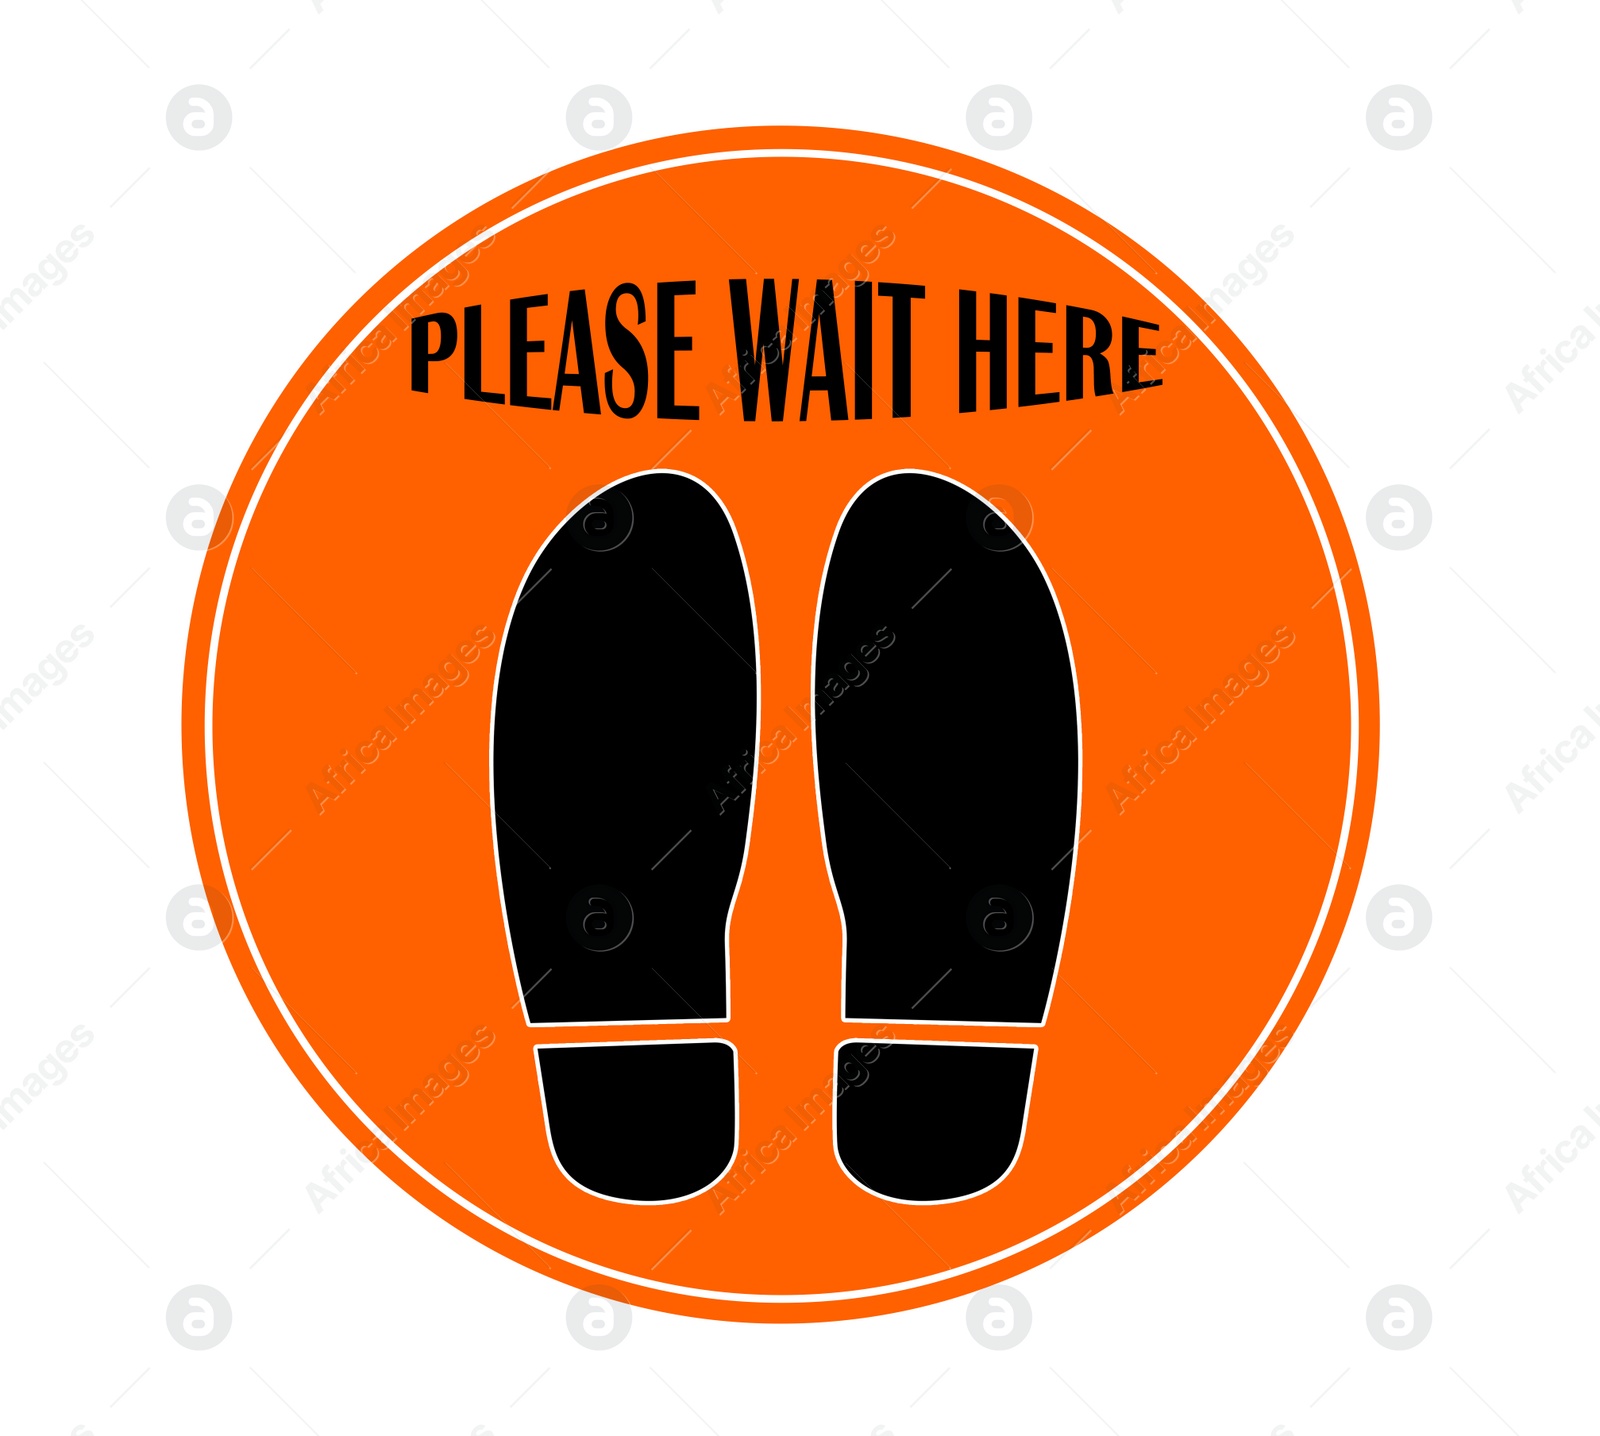 Illustration of Orange round sign with text Please Wait Here and shoe prints, illustration. Social distancing - protection measure during coronavirus pandemic